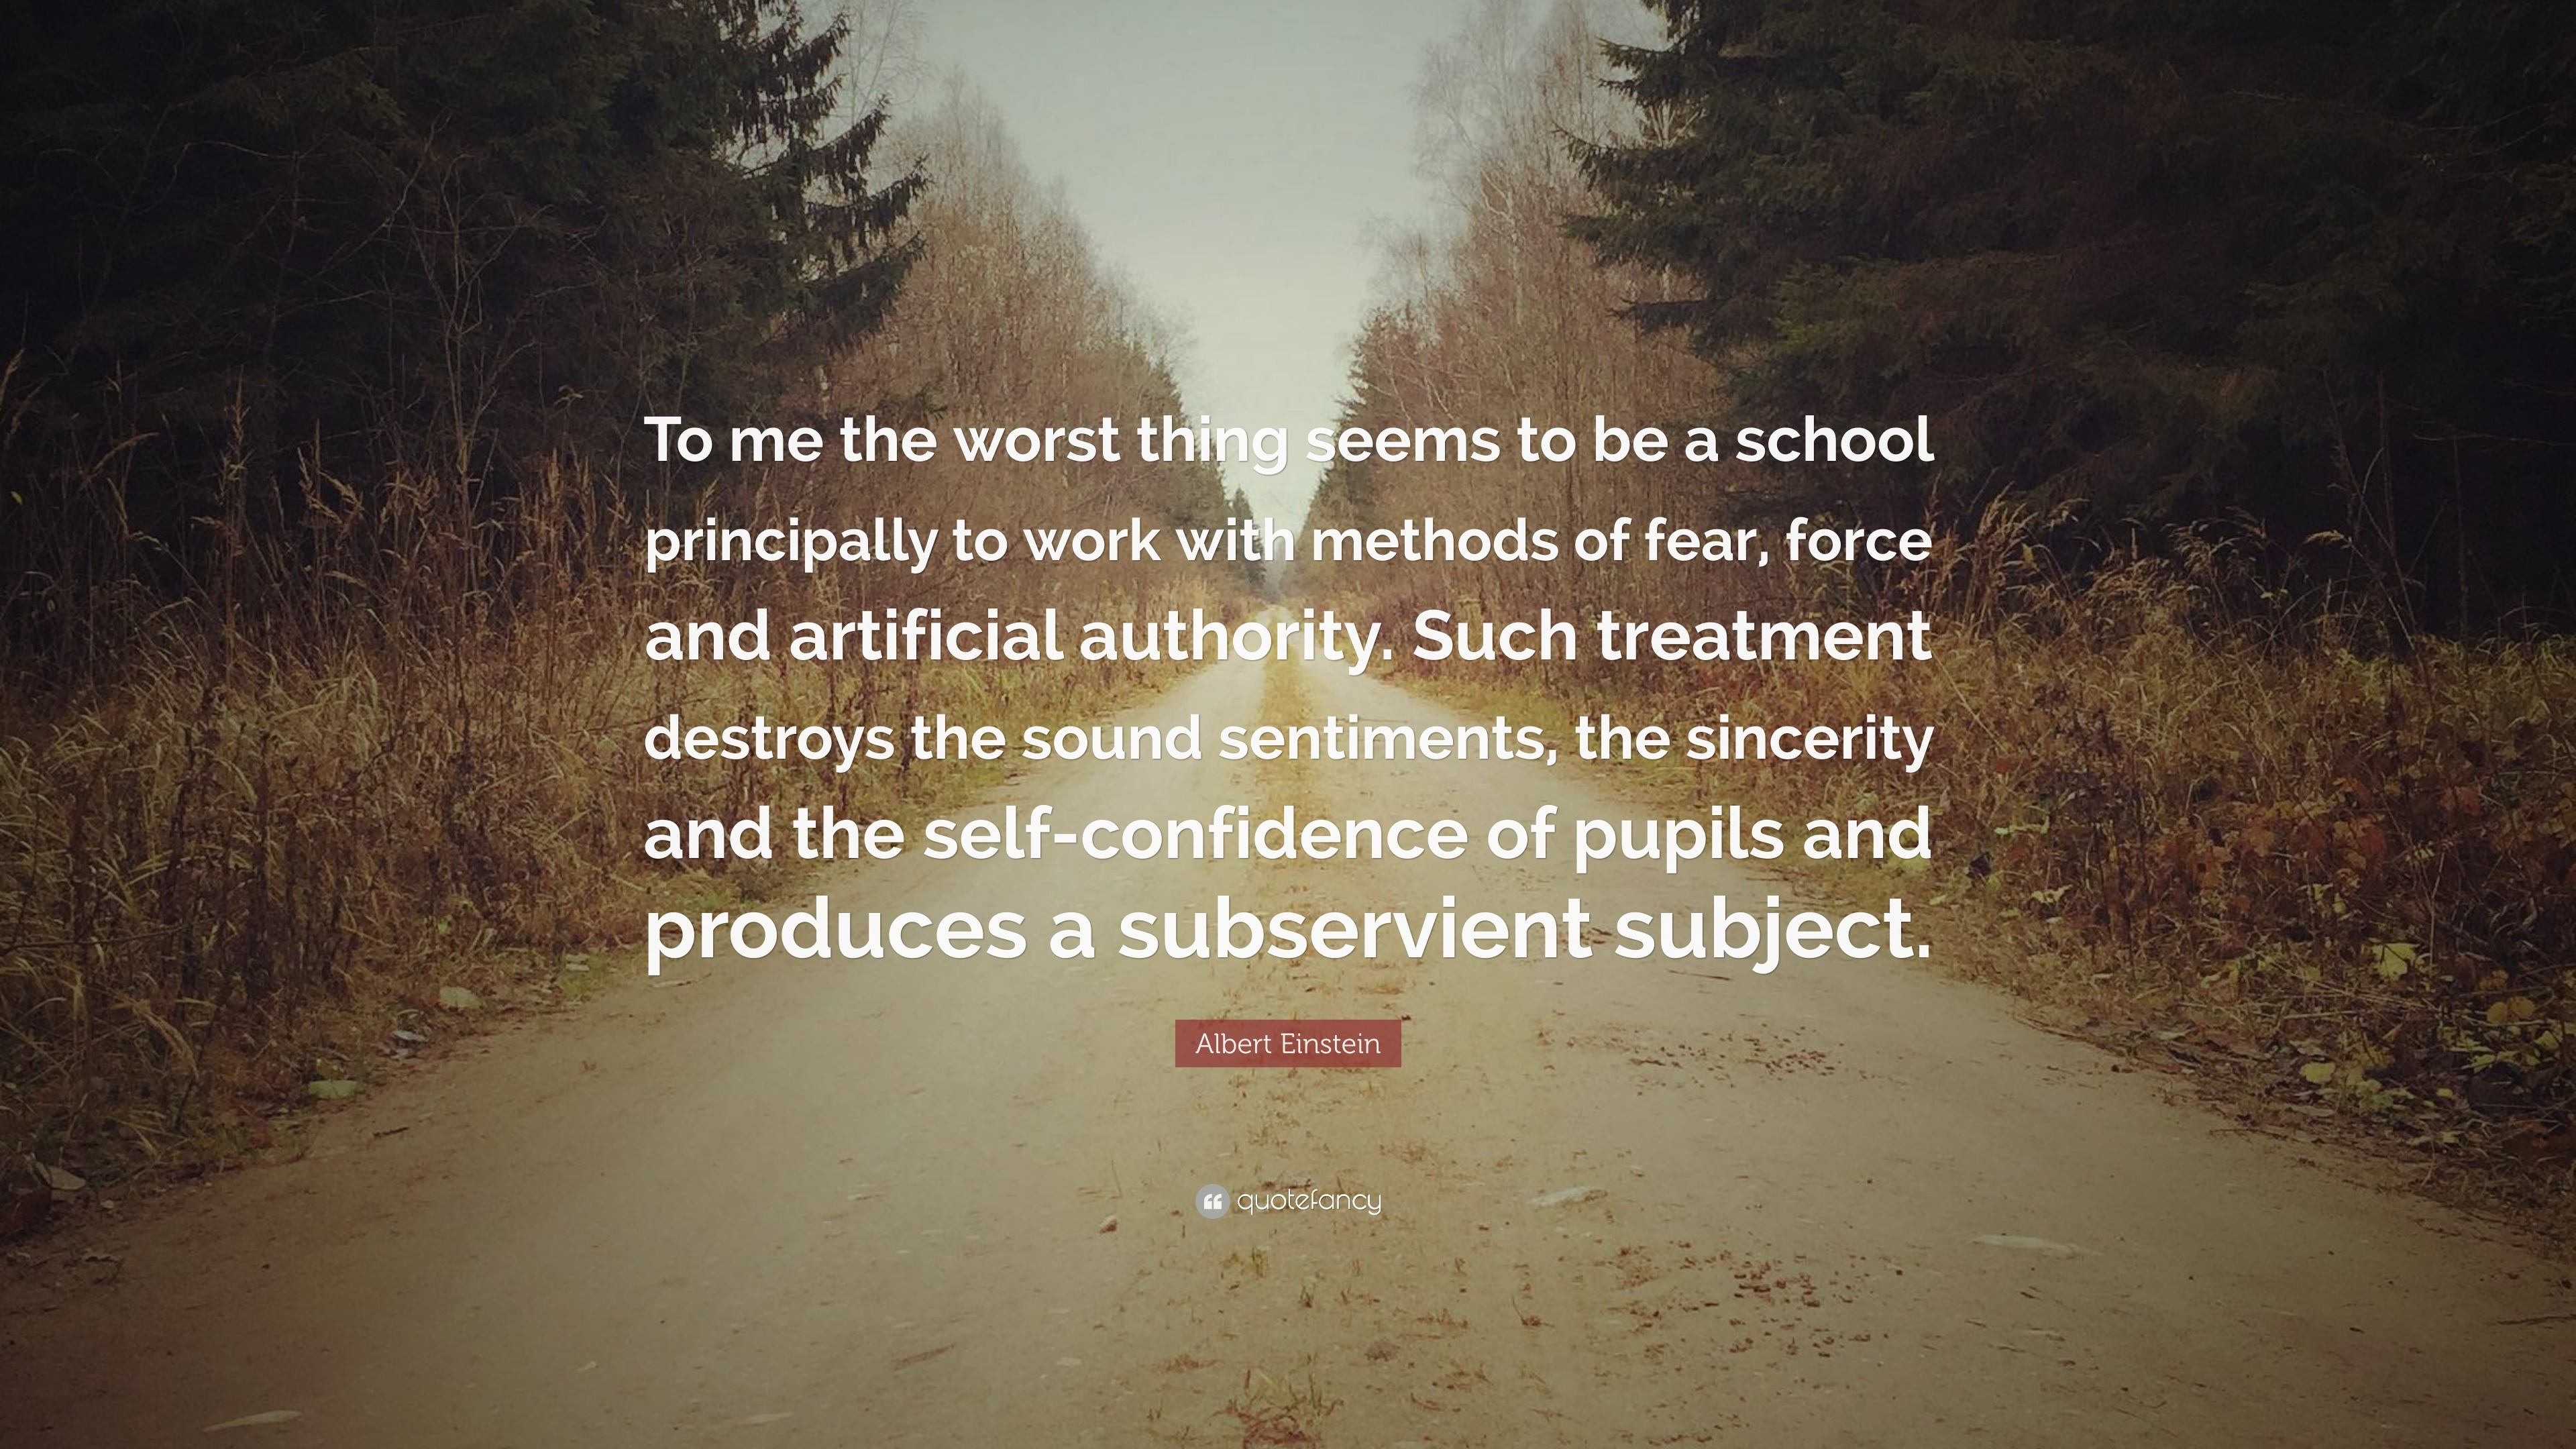 Albert Einstein Quote: “To me the worst thing seems to be a school ...